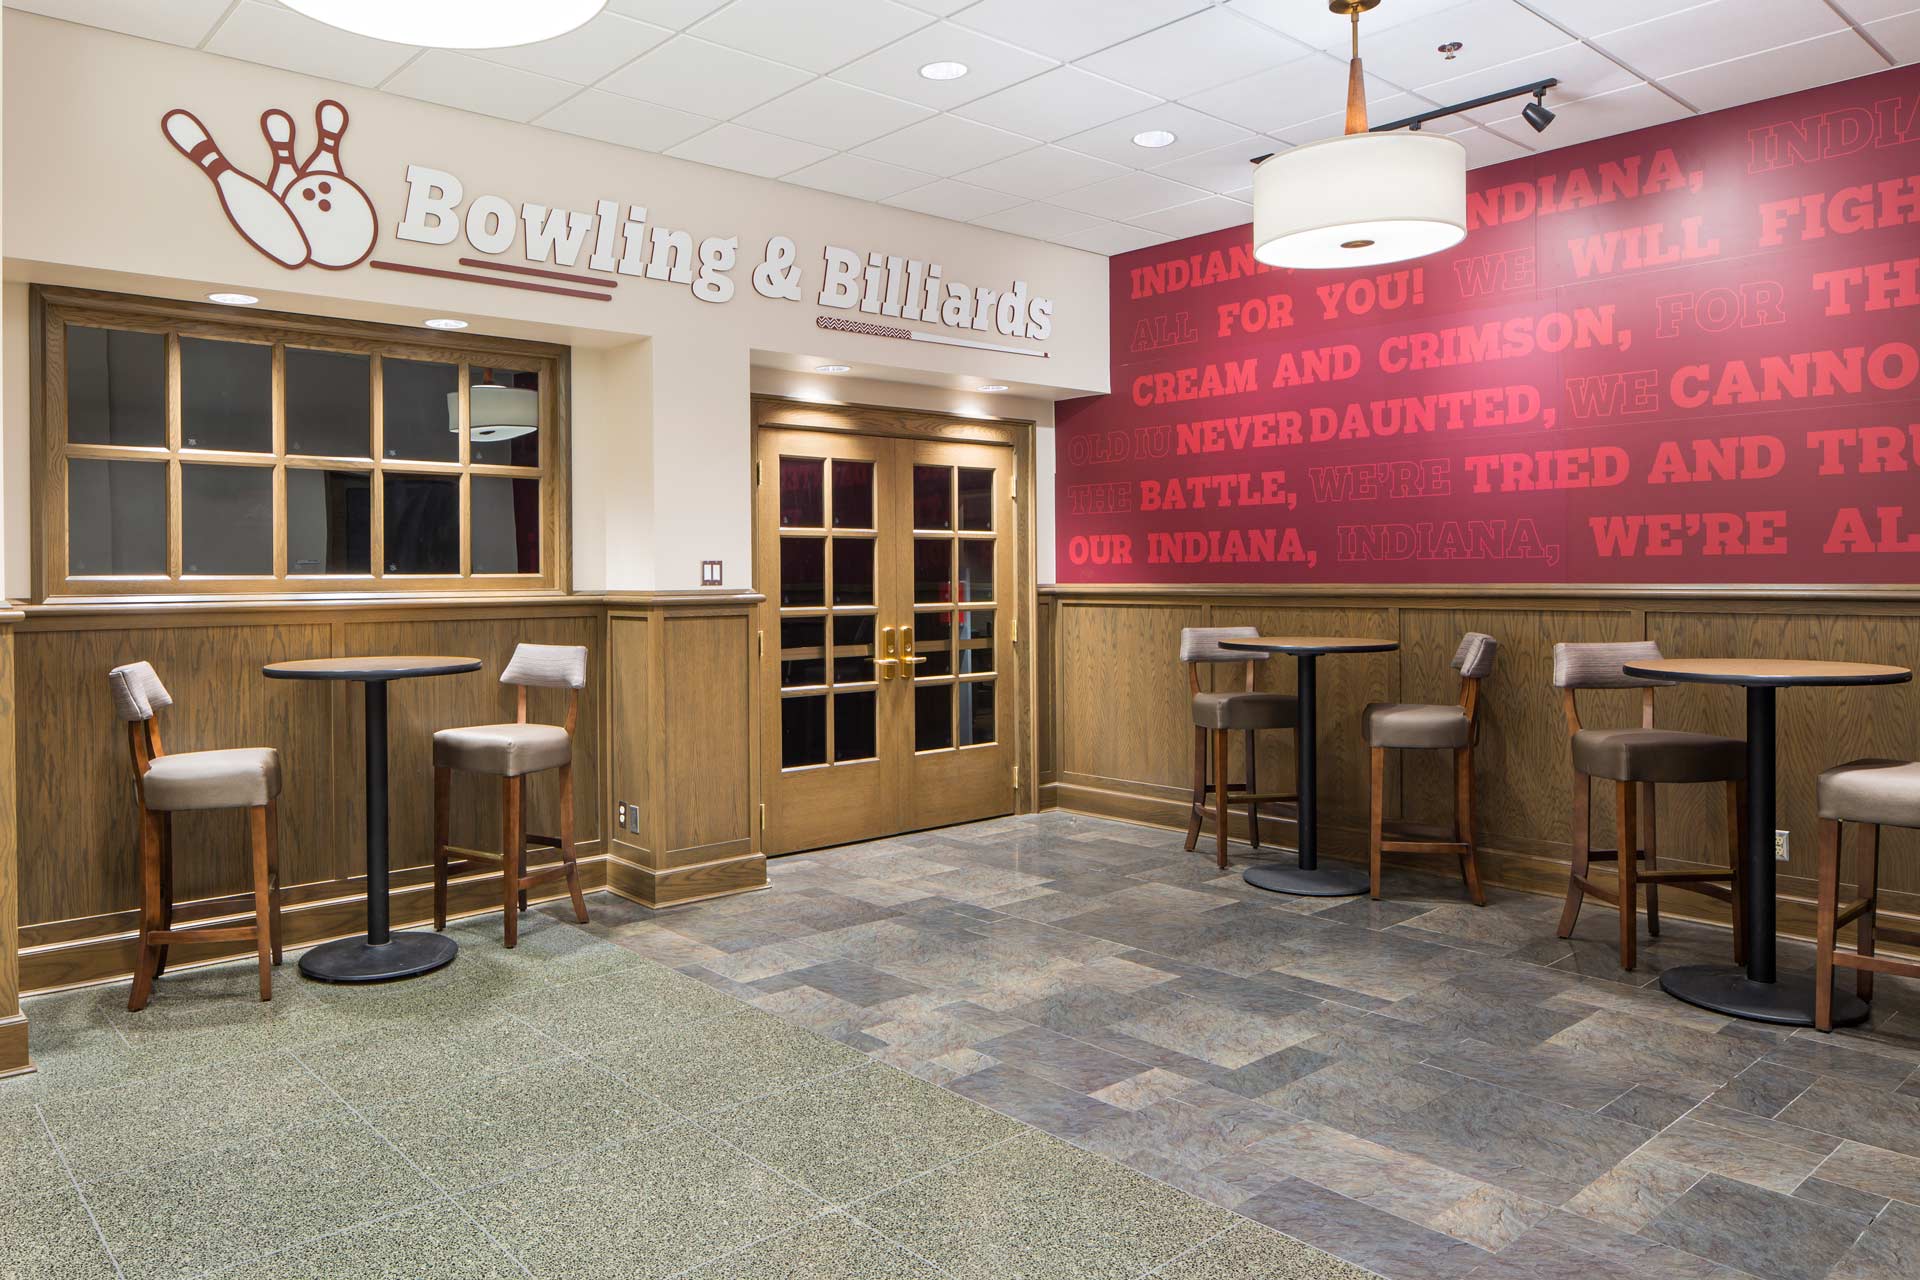 Indiana Memorial Union – Food & Dining Services Renovation